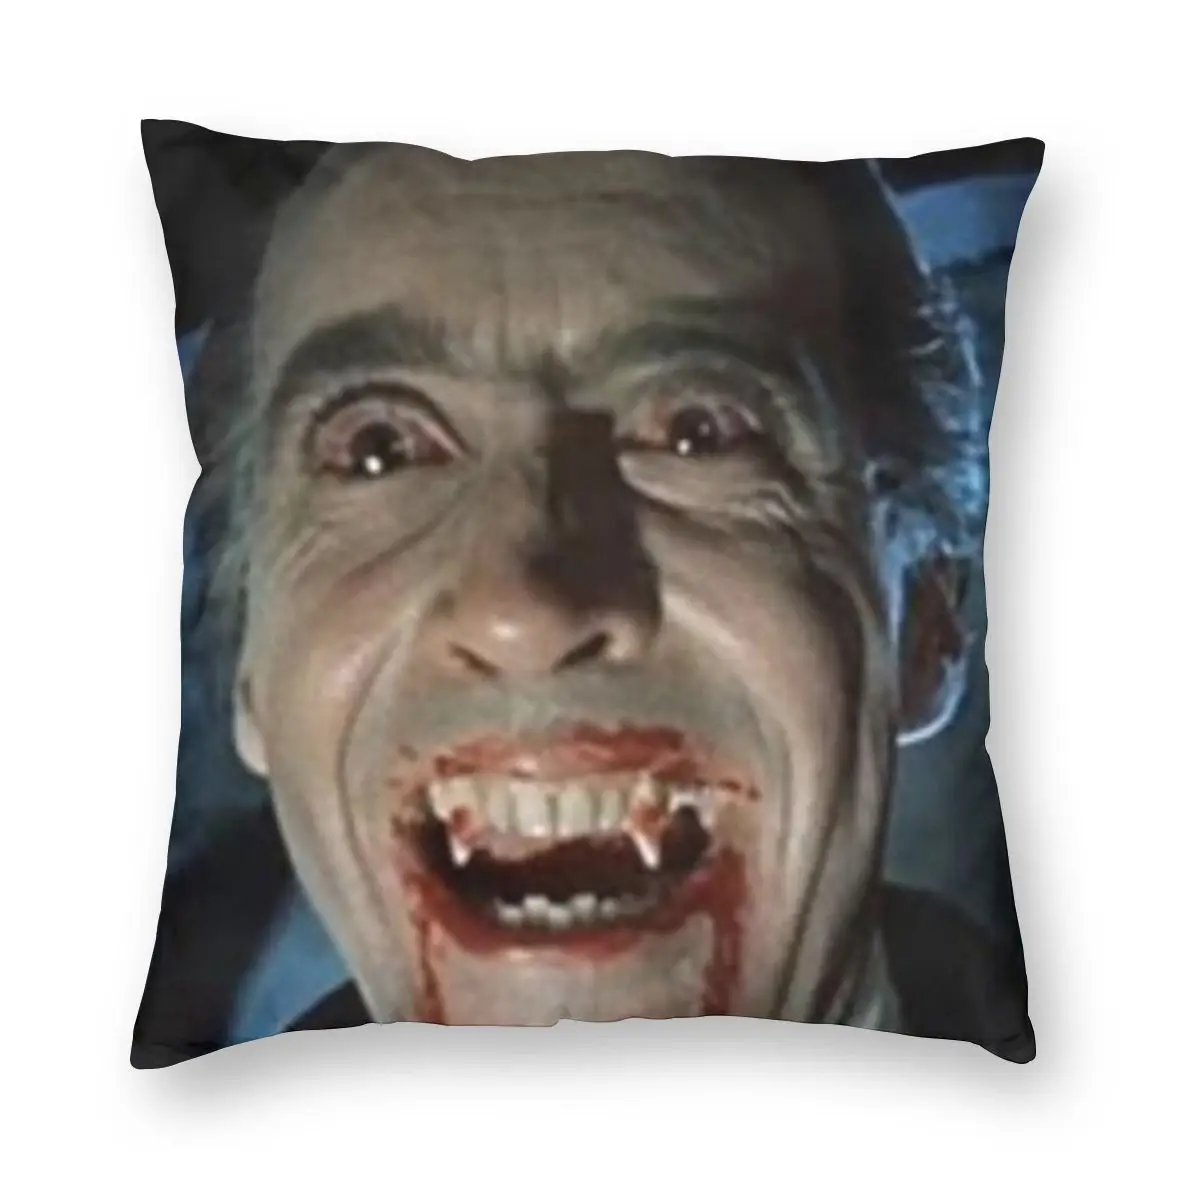 

Christopher Lee Dracula 1958 Pillowcase Printed Fabric Cushion Cover Gift VAMPIRE. DRACULA. Pillow Case Cover Bed Square 40X40cm